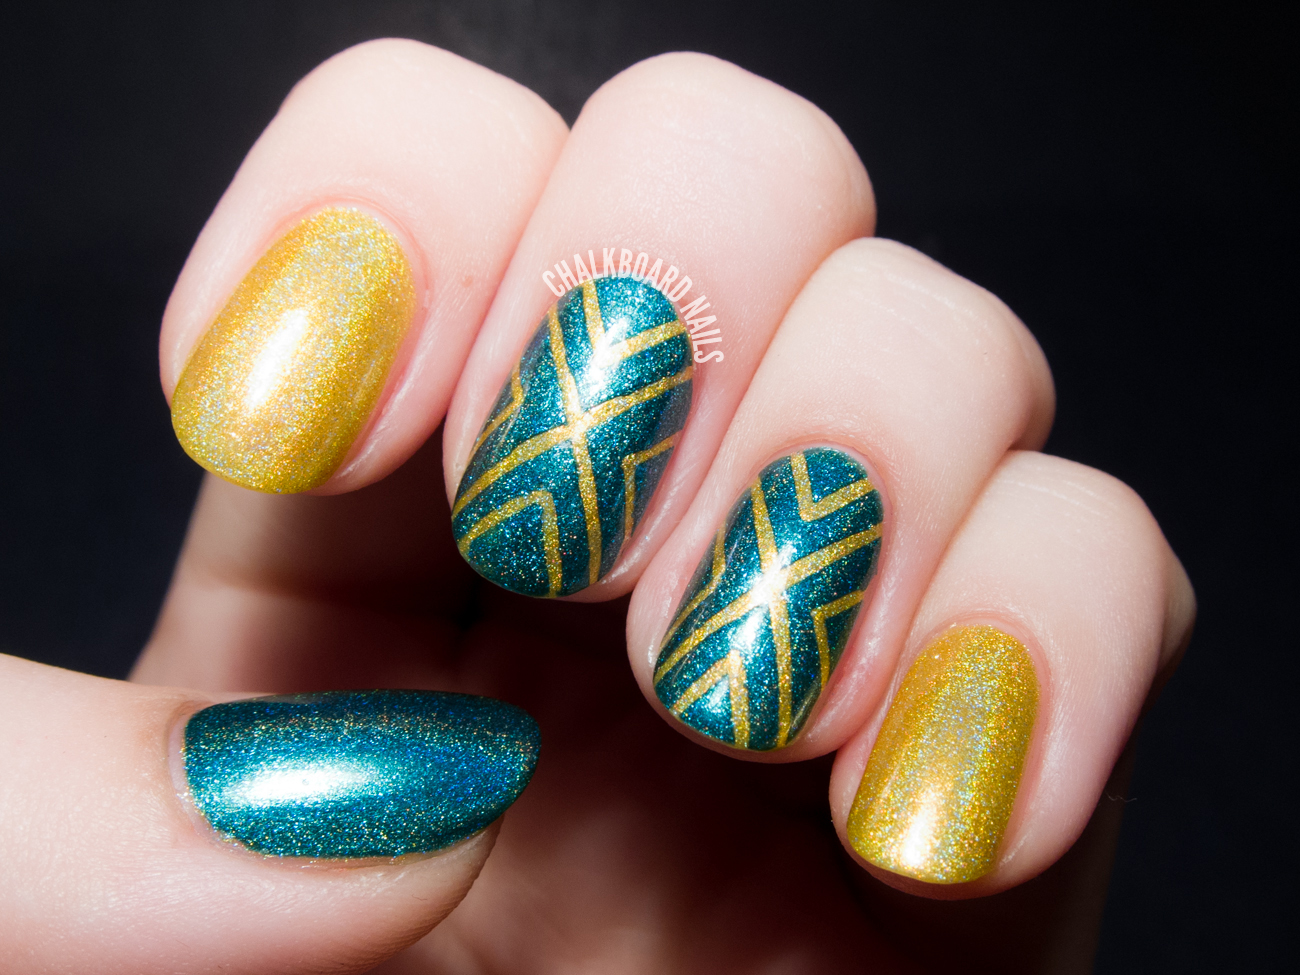 3. Creative Nail Art Ideas Using Surgical Tape - wide 2